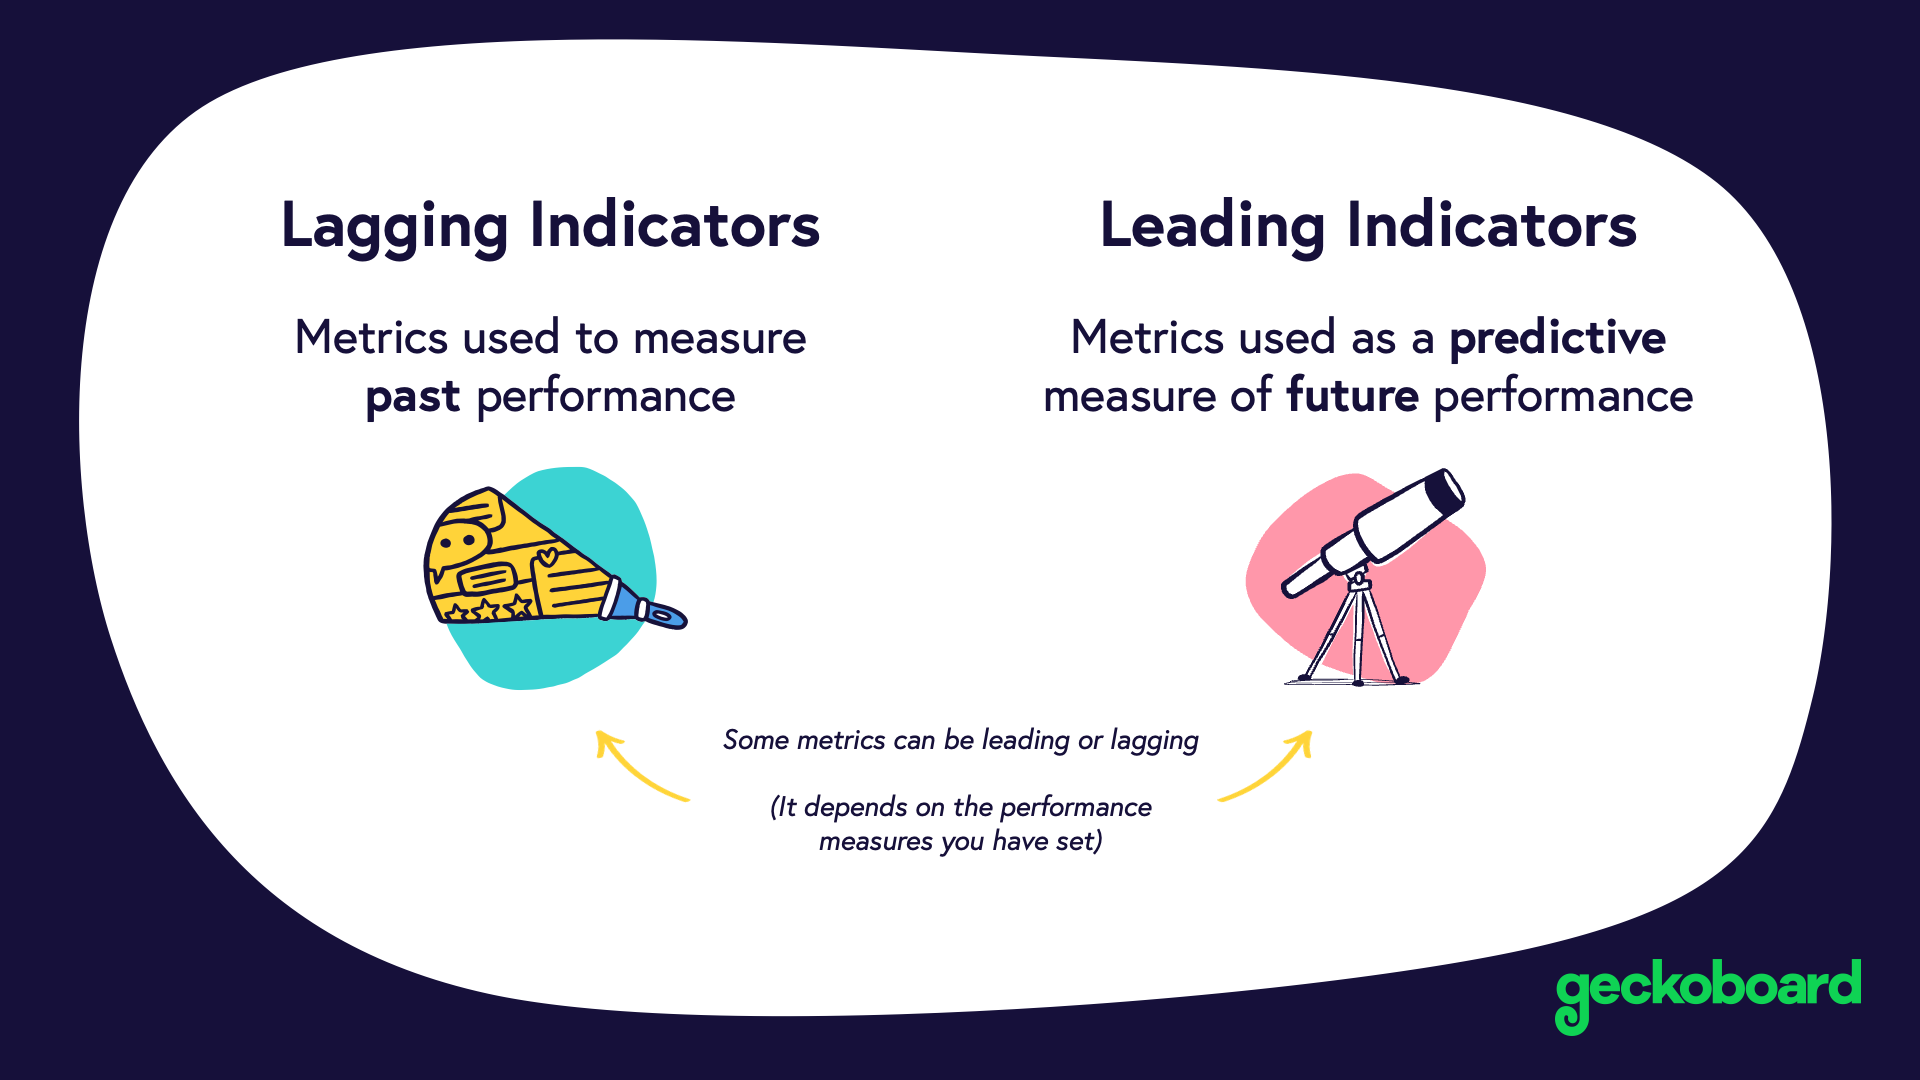 Is KPI a leading or lagging indicator?